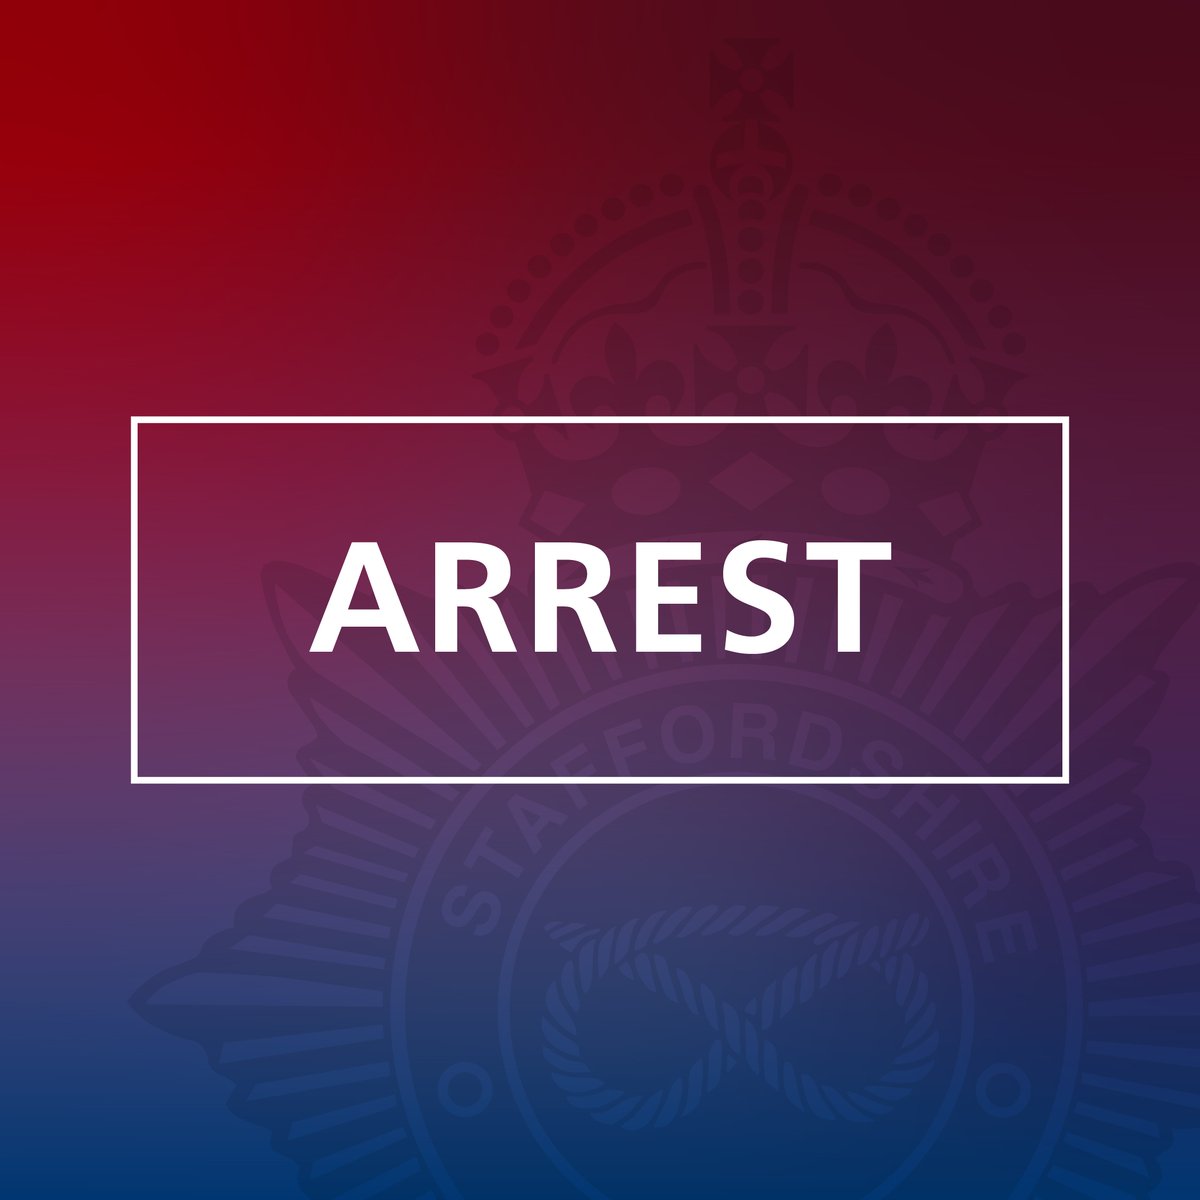 ARREST; Earlier today, officers arrested three males for two separate theft incidents that came in one after another at the same location. All males were taken to custody where it was discovered that one of them was wanted on a recall to prison! #Arrest #Theft #Cannock #Police